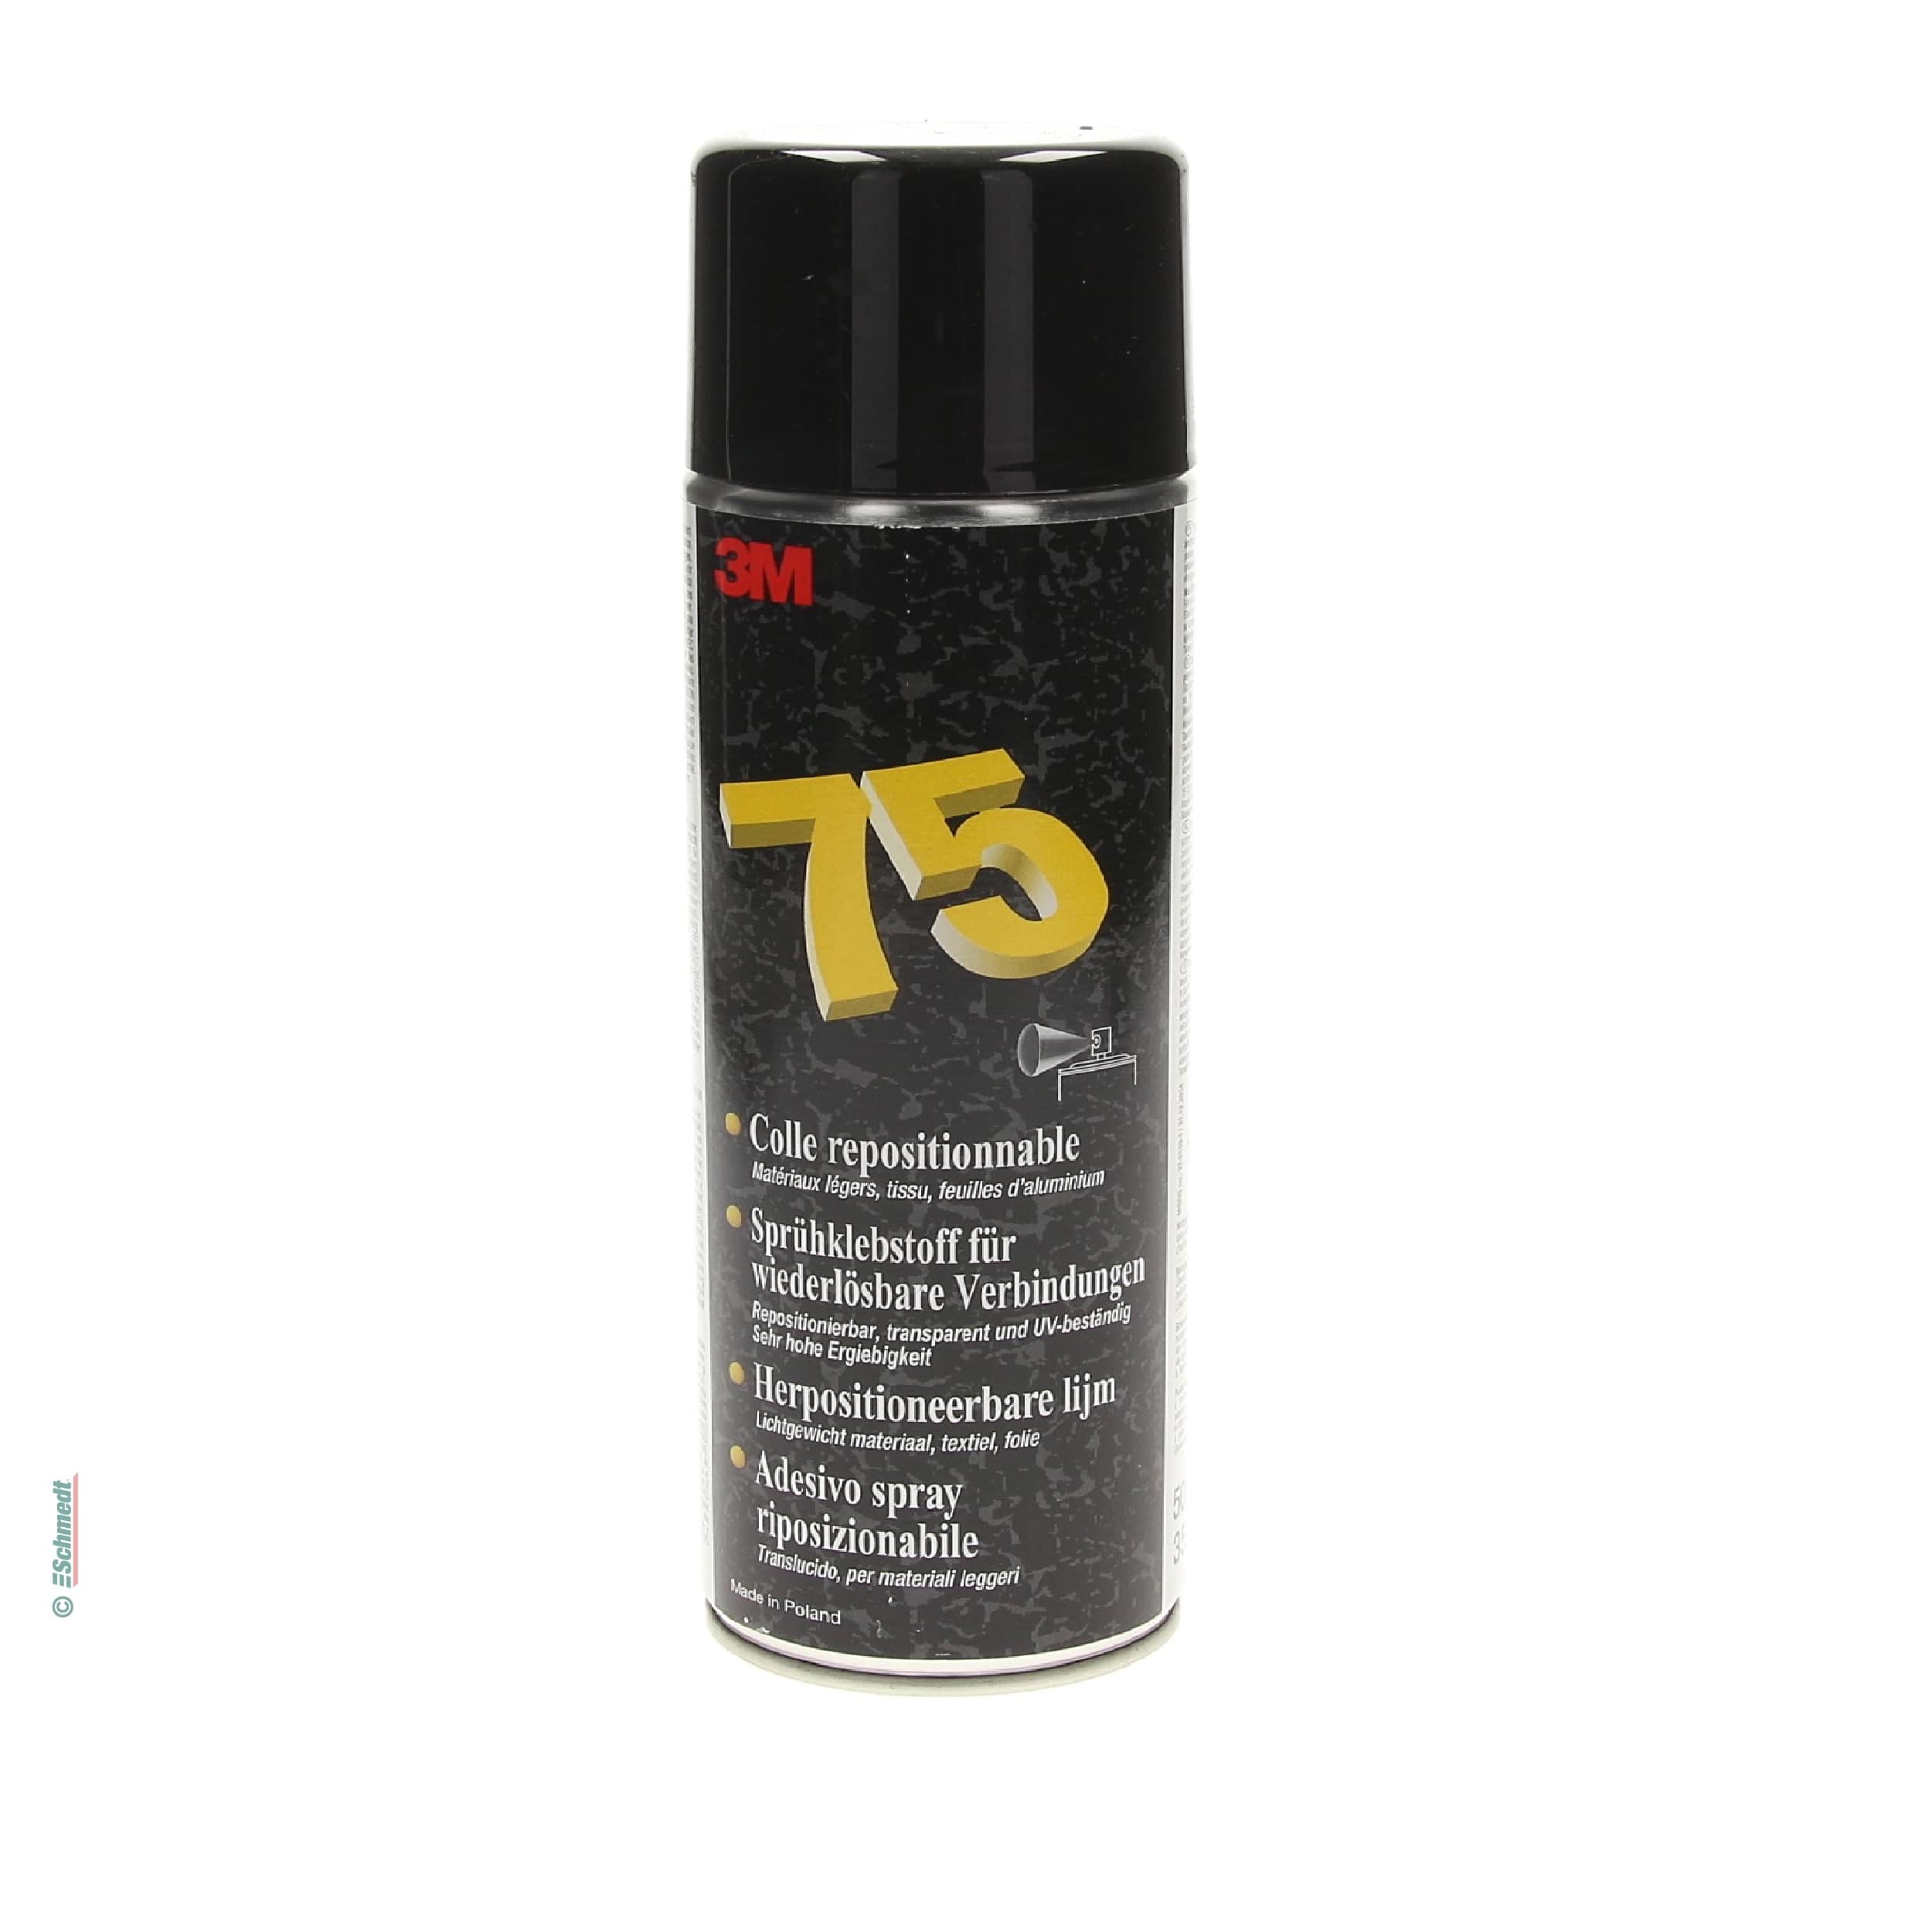 Spray adhesive Type Scotch-Weld 75 - removable / repositionable - gluing of light-weight substrates such as paper, cardboard, cloth, films a...